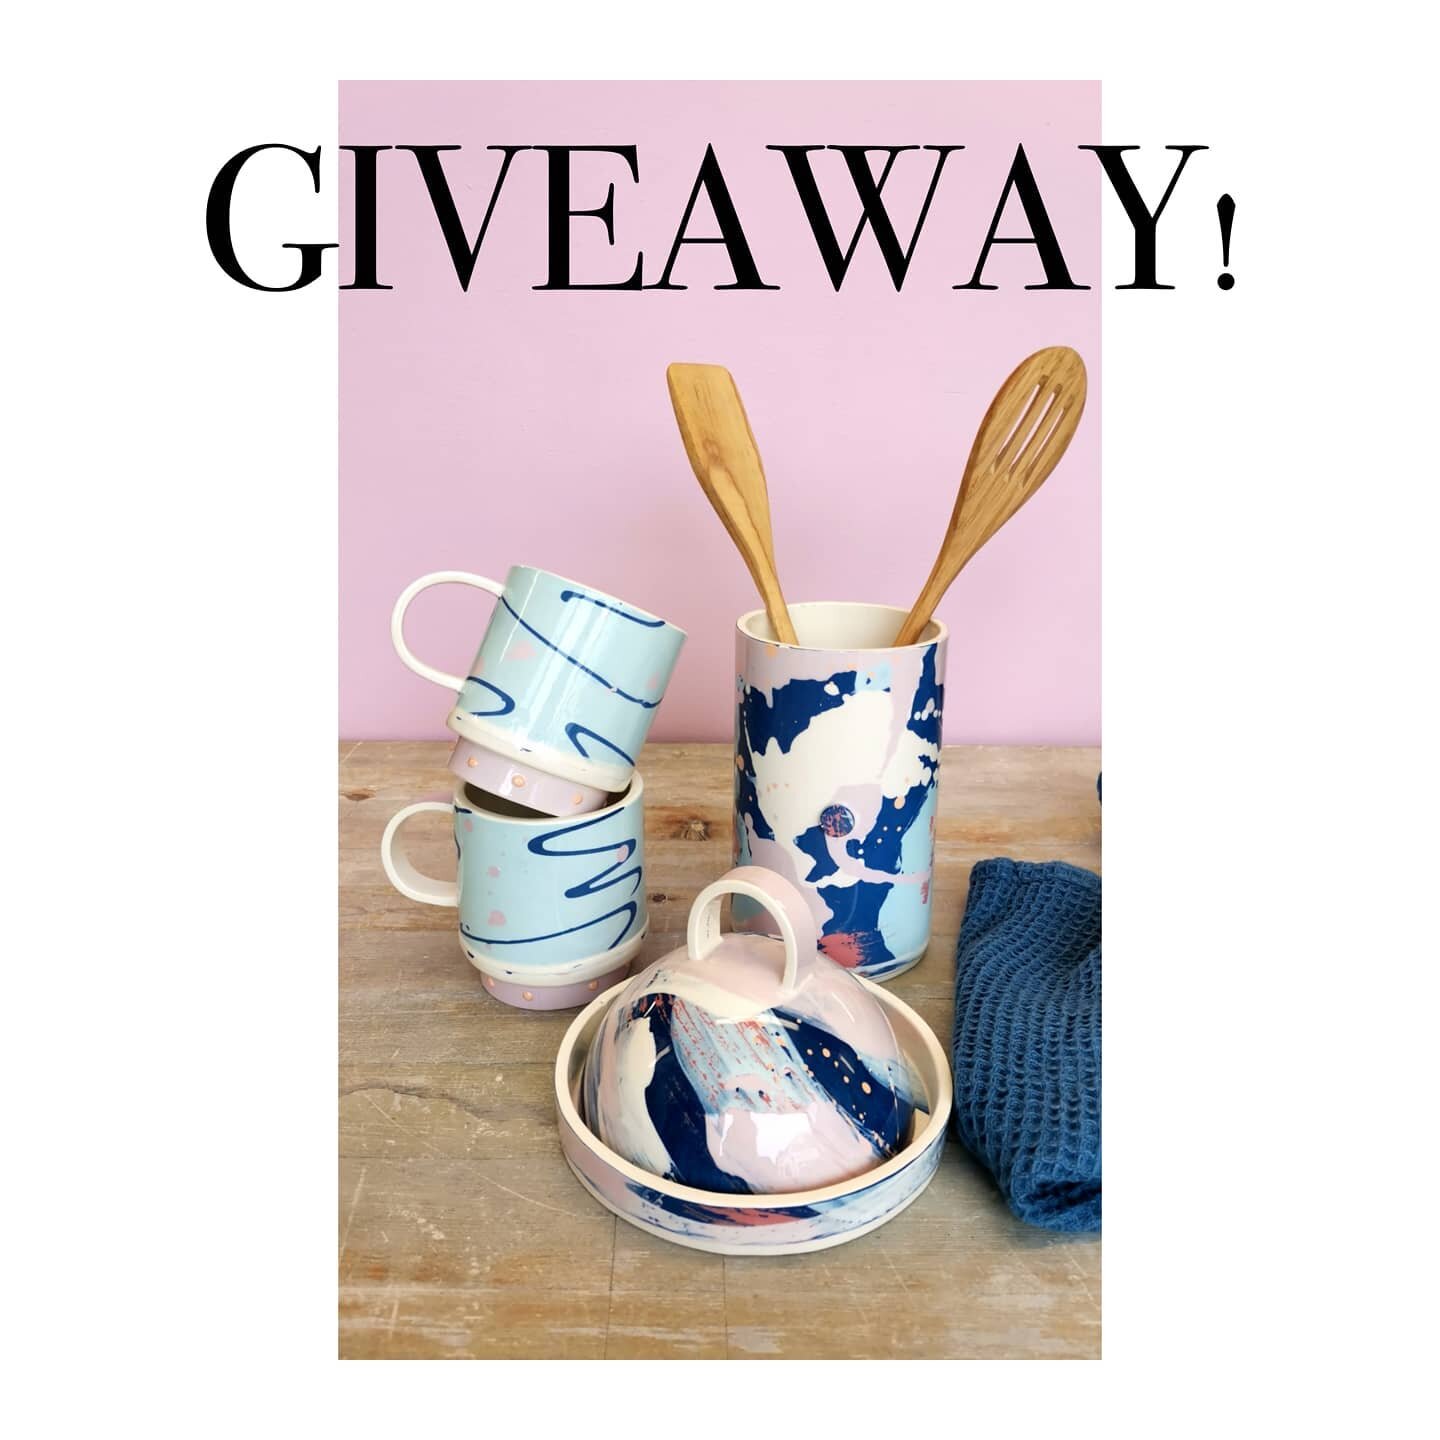 ⚡⚡⚡ GIVEAWAY TIME ⚡⚡⚡

I'm well overdue a giveaway so here we go. Woop woop! 🤸&zwj;♀️

I've got a pair of Orange Dot Mugs, a Utensil Pot and a Butter Dish all up for grabs. Each item is hand decorated with playful, energetic designs, perfect for bri